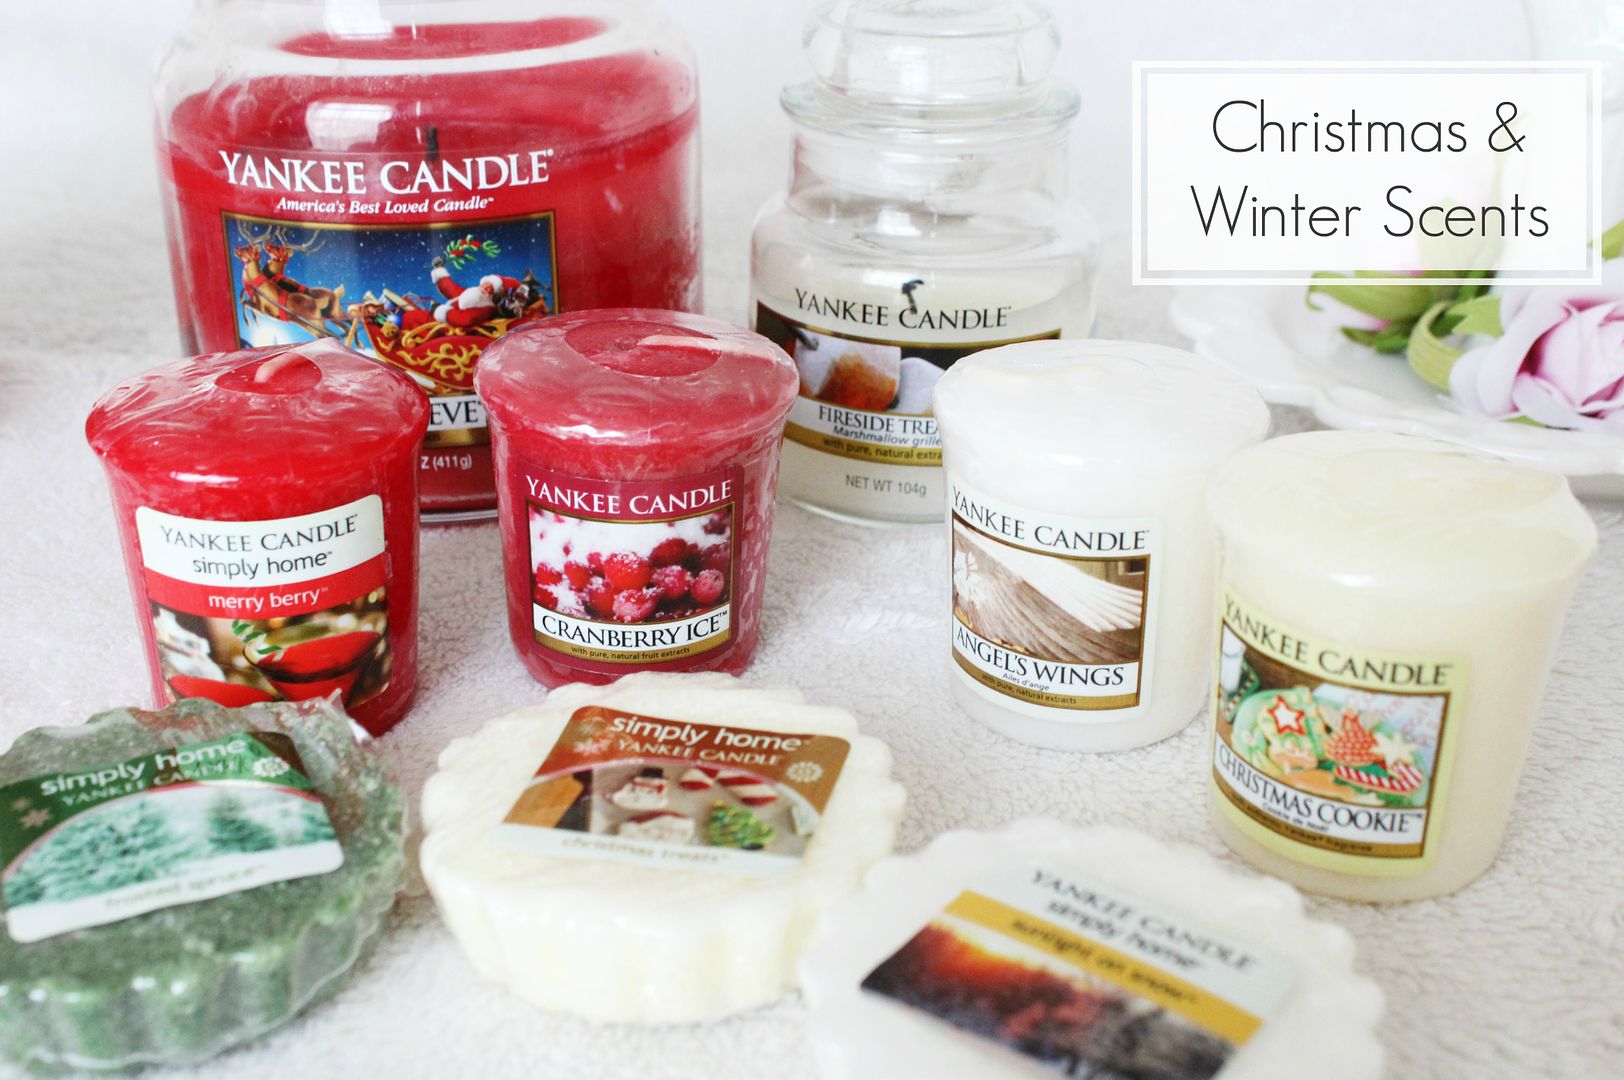 Yankee-Candle-Collection-Jar-Votive-Samplers-Wax-Melts-Tarts-Christmas-Winter-Scents-Belle-Amie-UK-Beauty-Fashion-Lifestyle-Blog